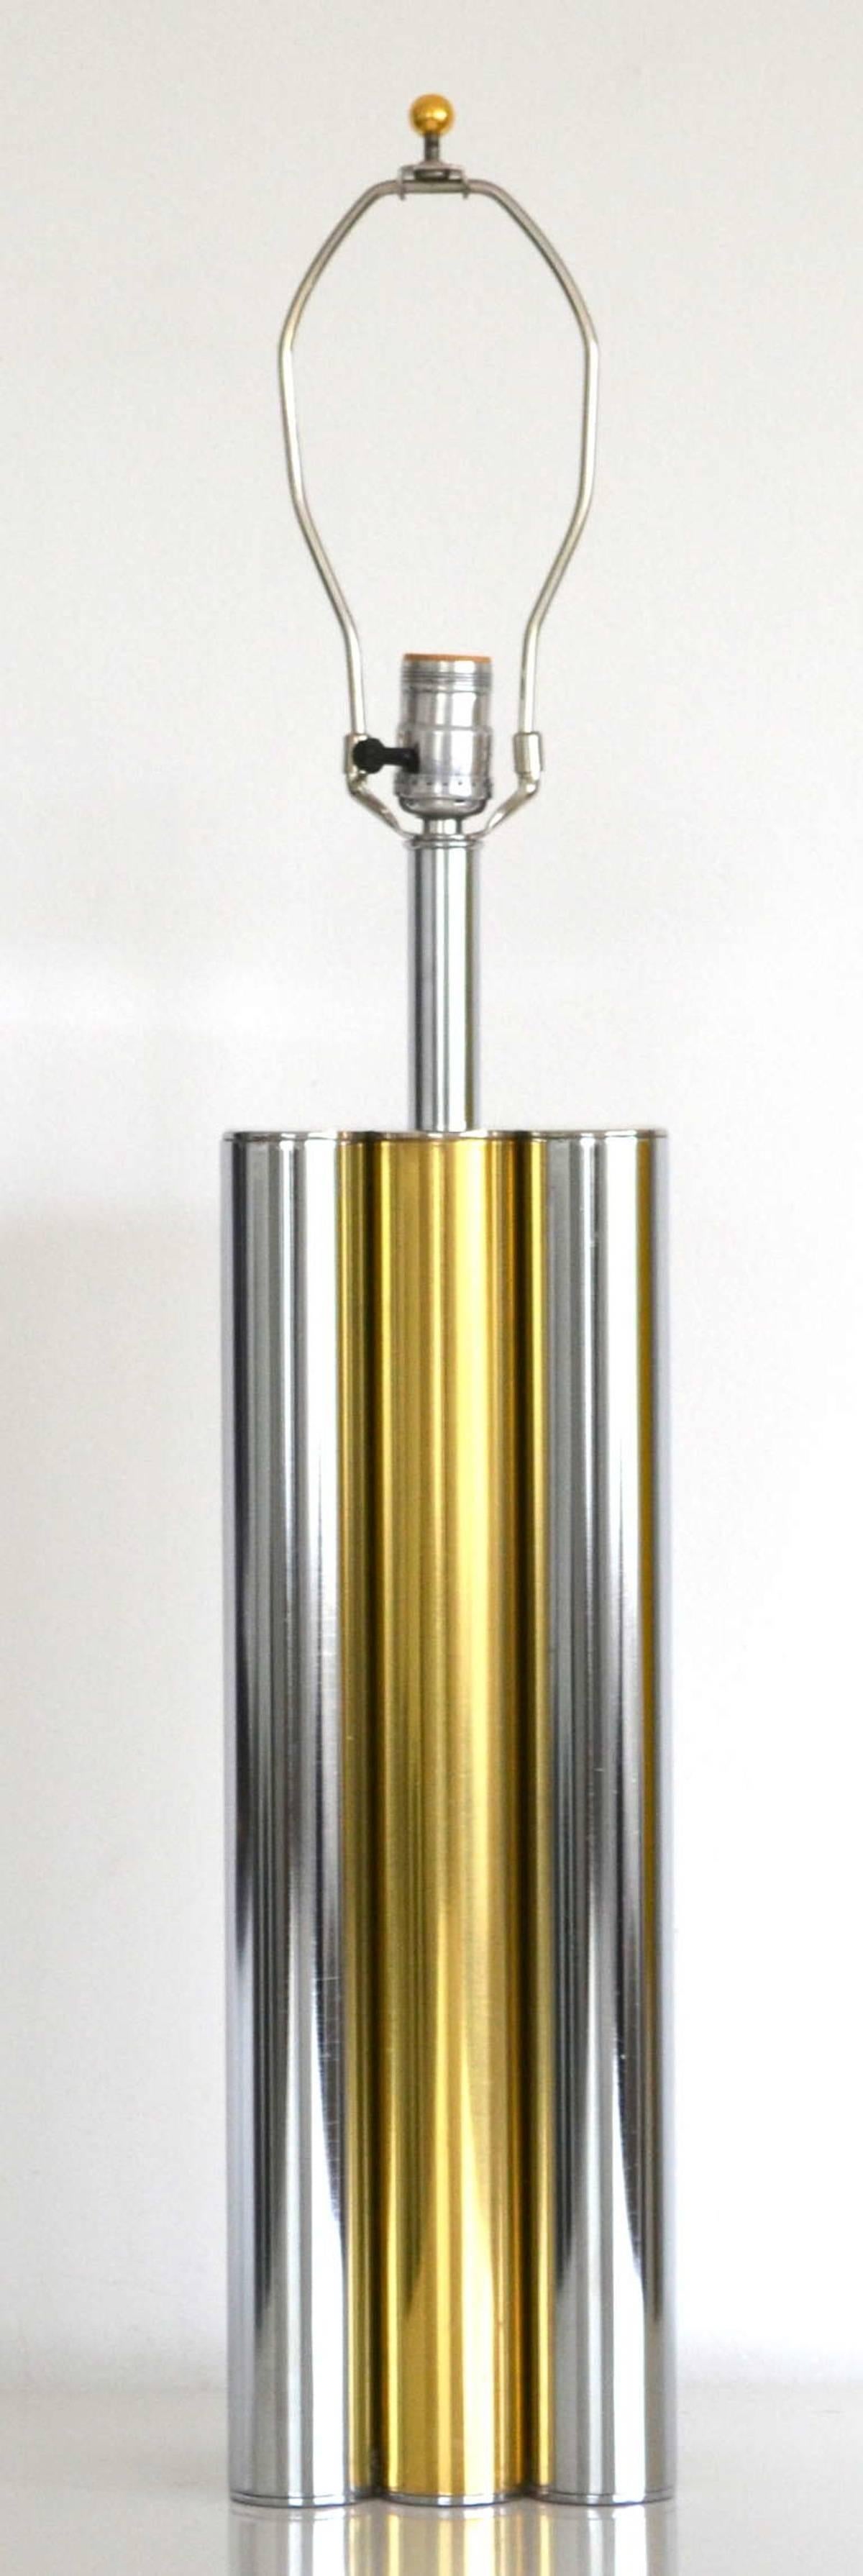 Striking midcentury architecturally influenced column form table lamp, circa 1960s-1970s. This sleek tubular lamp is composed of alternating chrome and brass cylinders. Shade not included.

Measurements:
31